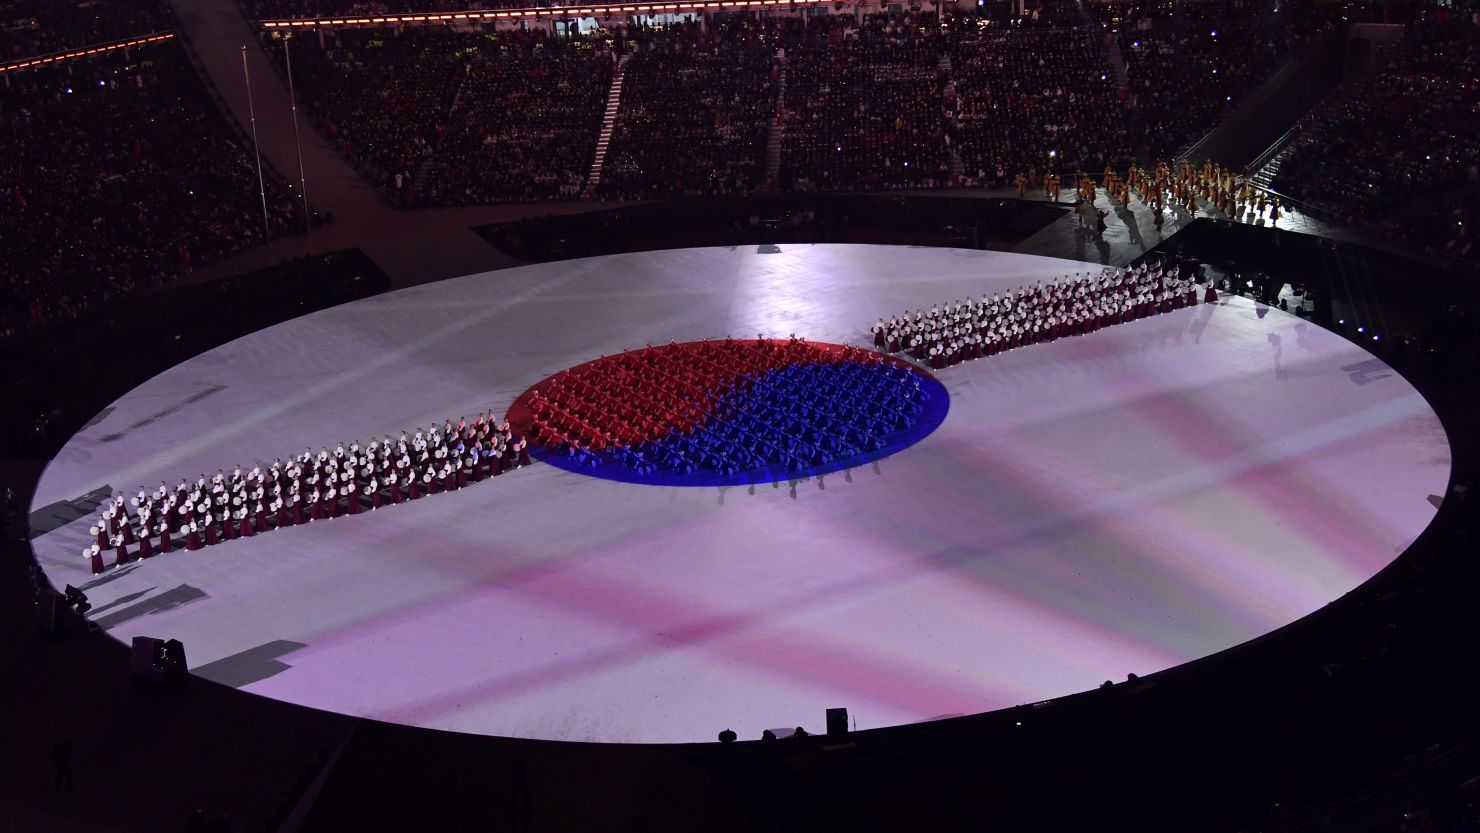 Artists perform during the opening ceremony of the Pyeongchang 2018 Winter Olympic Games at the Pyeongchang Stadium on February 9, 2018.  